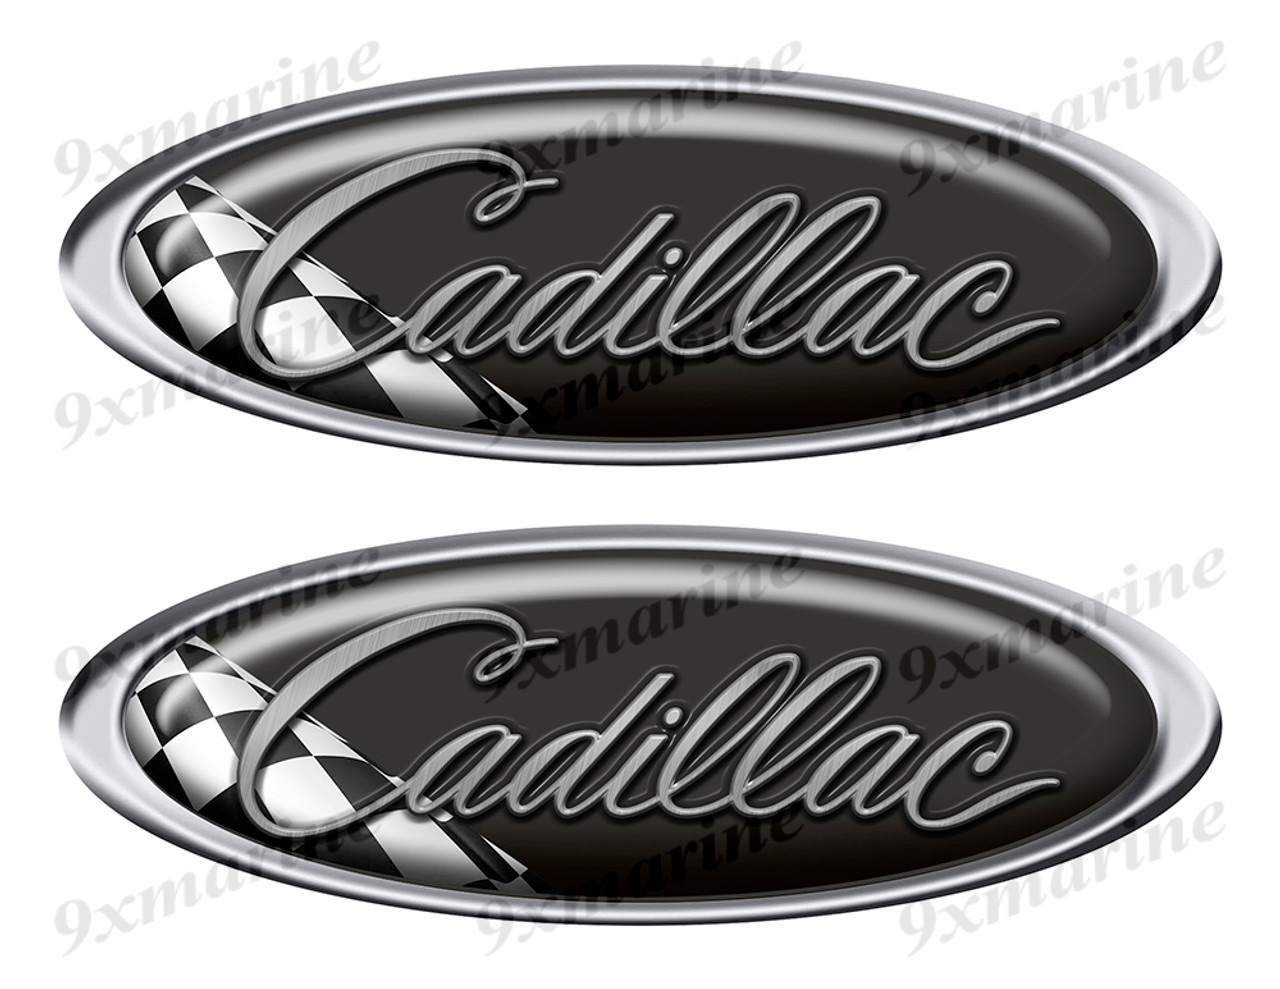 Two Cadillac Classic Oval Stickers 10" long